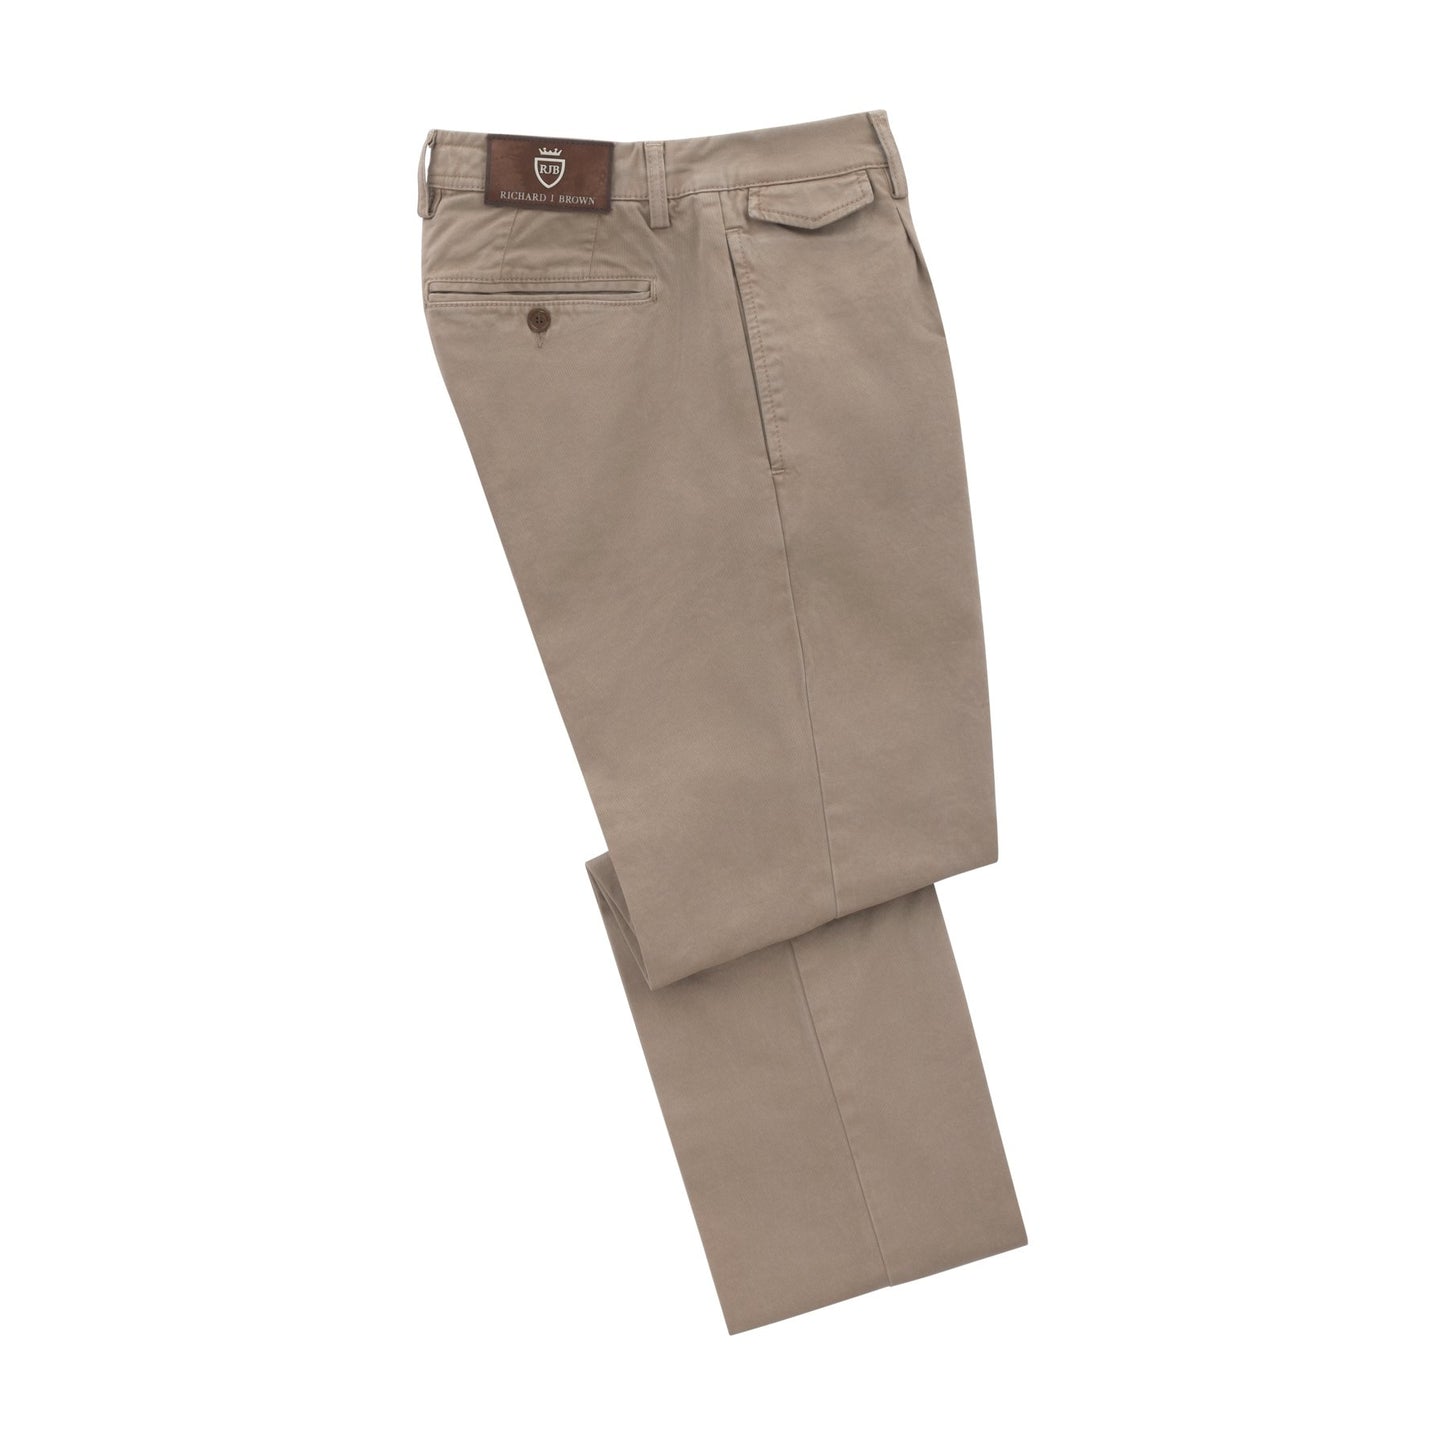 Richard J. Brown Regular-Fit Stretch-Cotton Trousers in Taupe - SARTALE